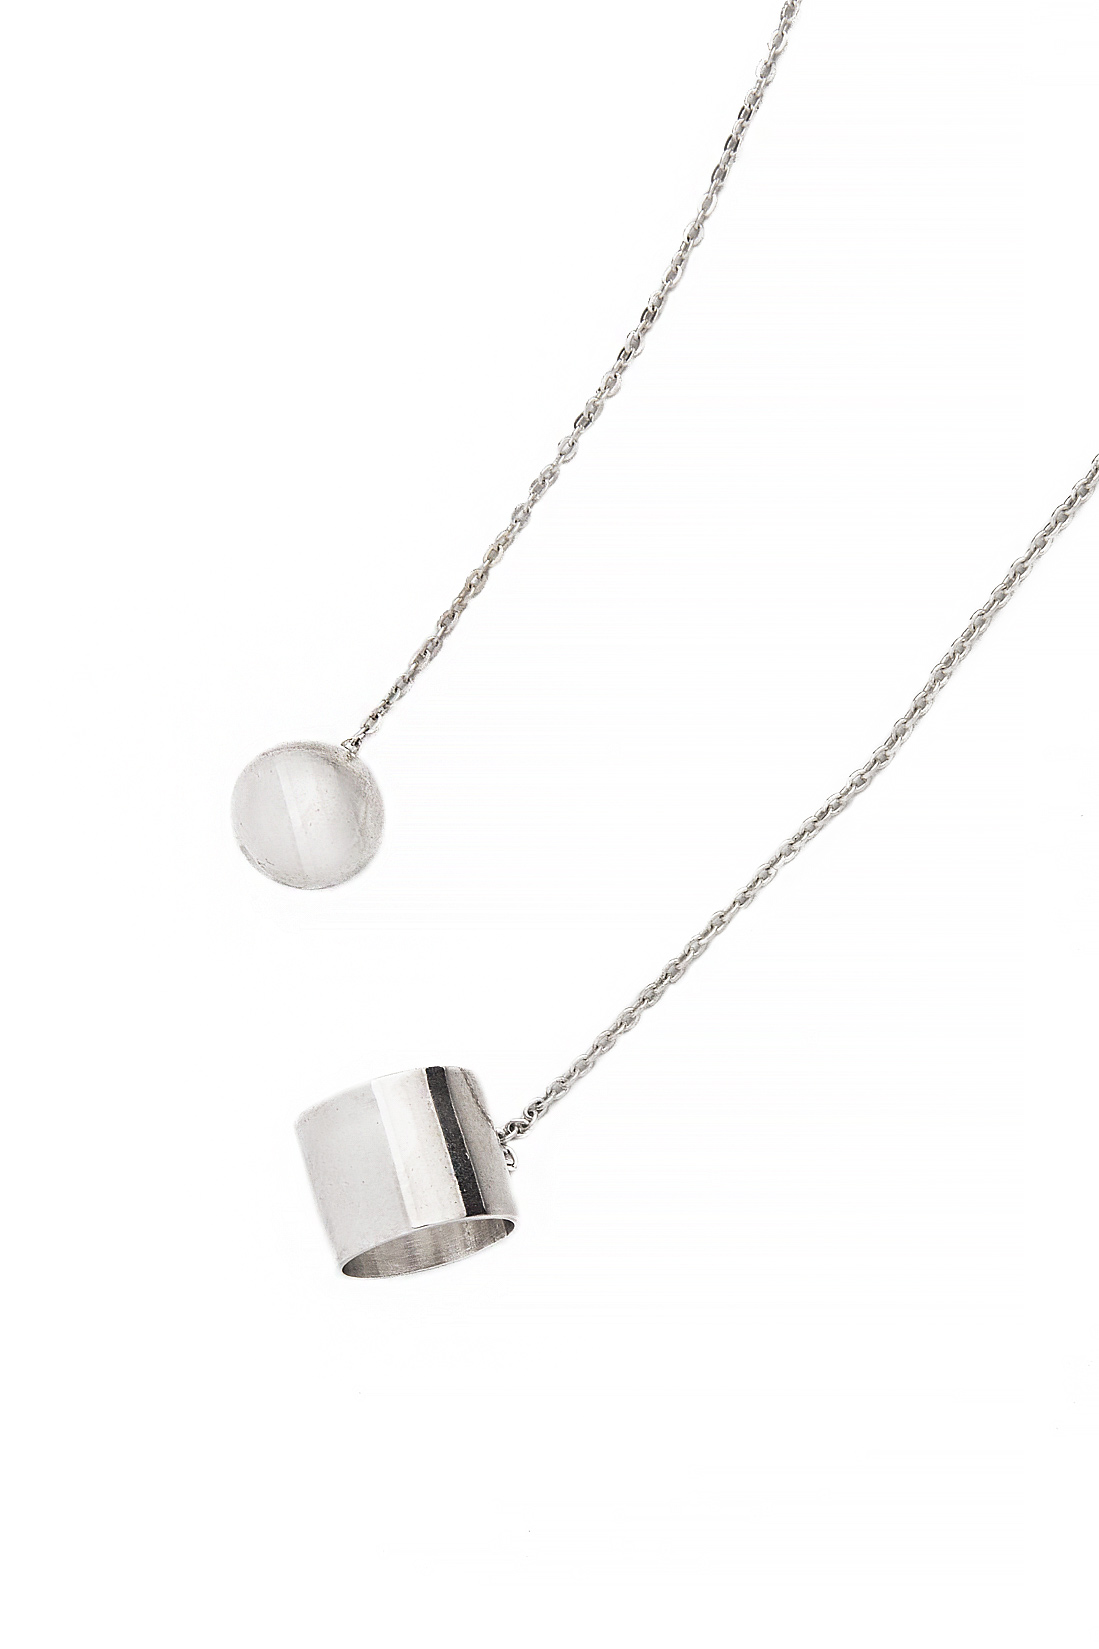 Ball in a cup silver necklace Snob. image 1